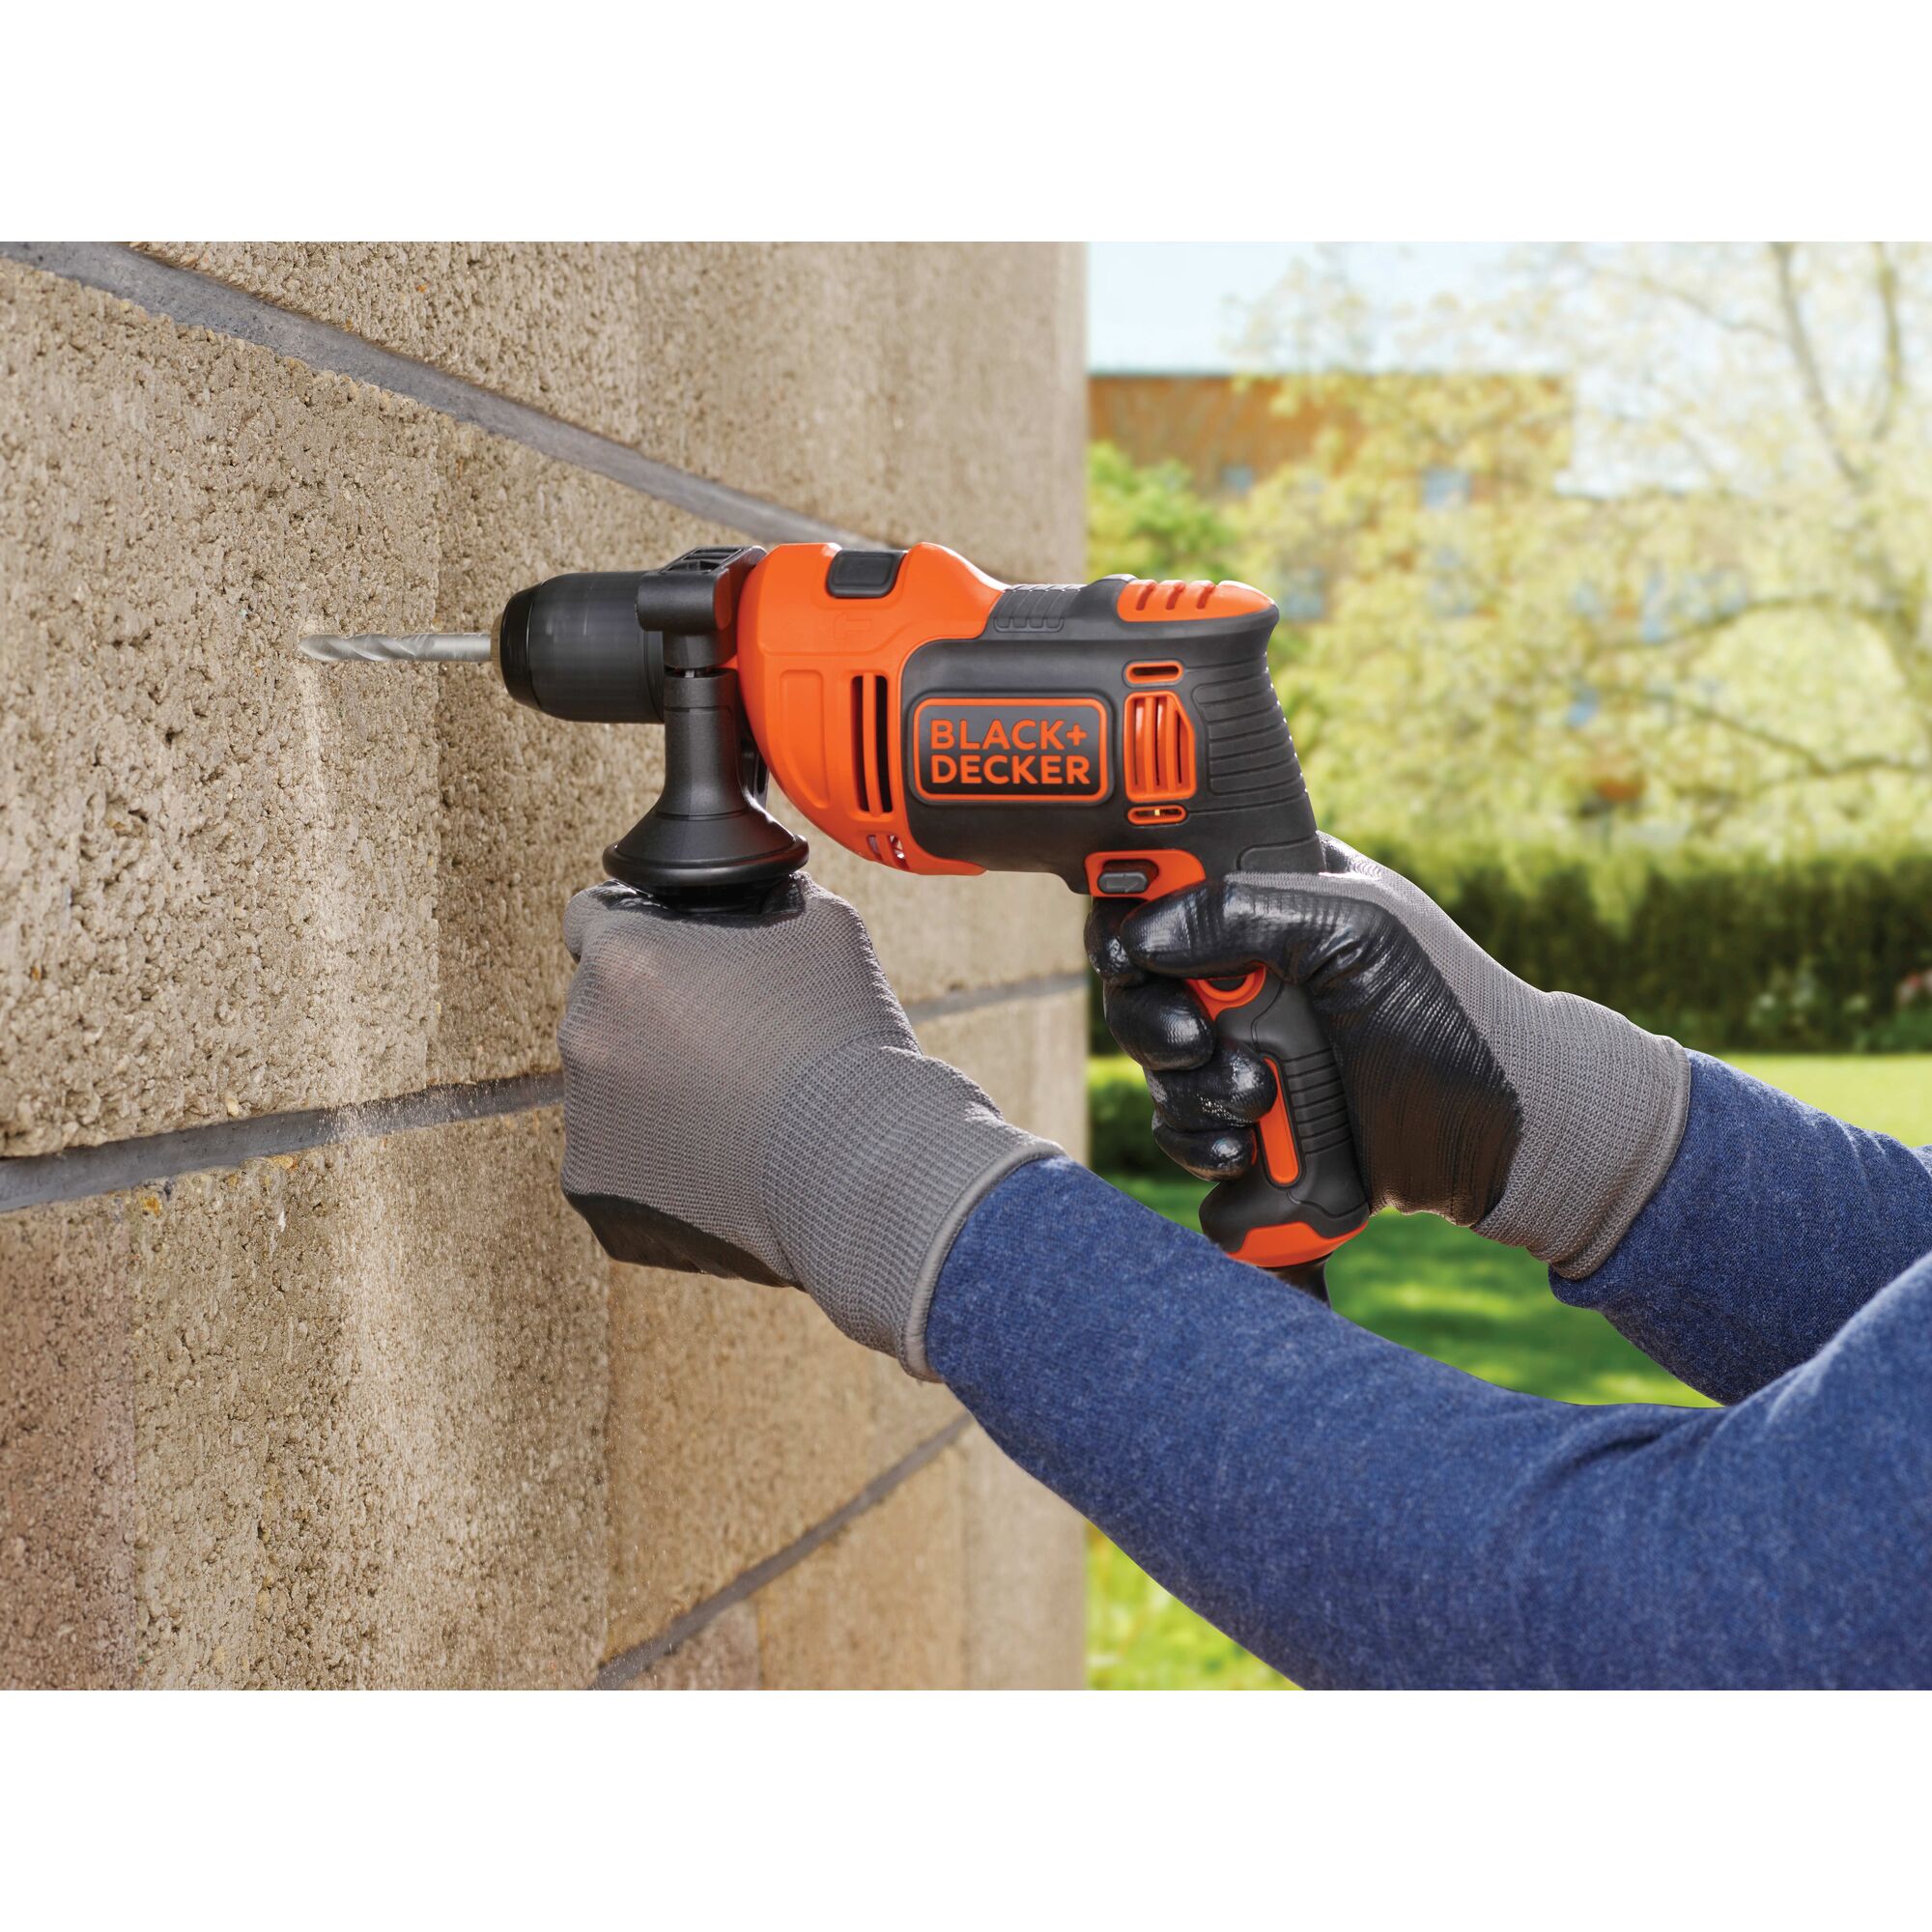 Black & Decker 1/2 Hammer Drill DR601 Corded Electric 6 Amp with